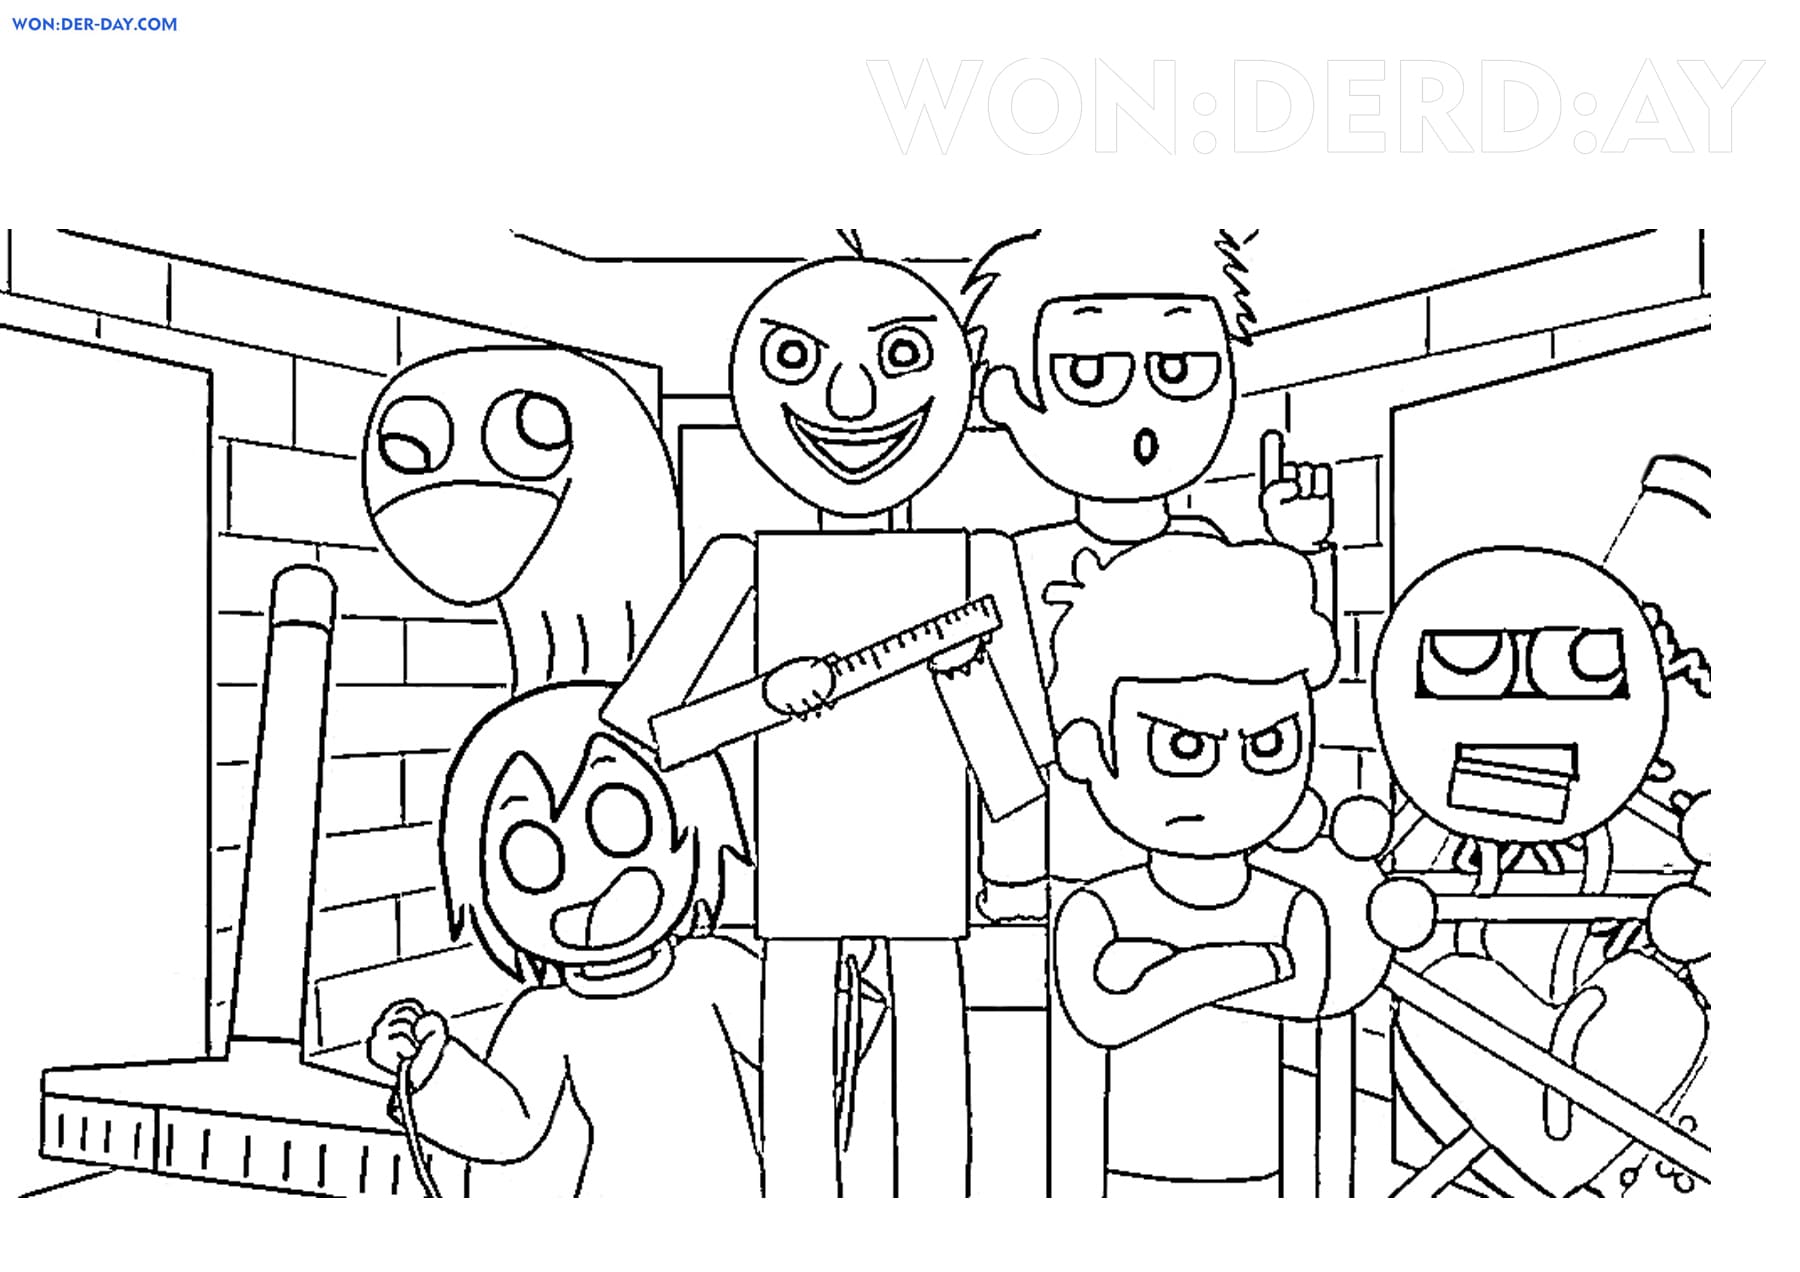 Full Body Baldi's Basics Coloring Pages Among us coloring pages are